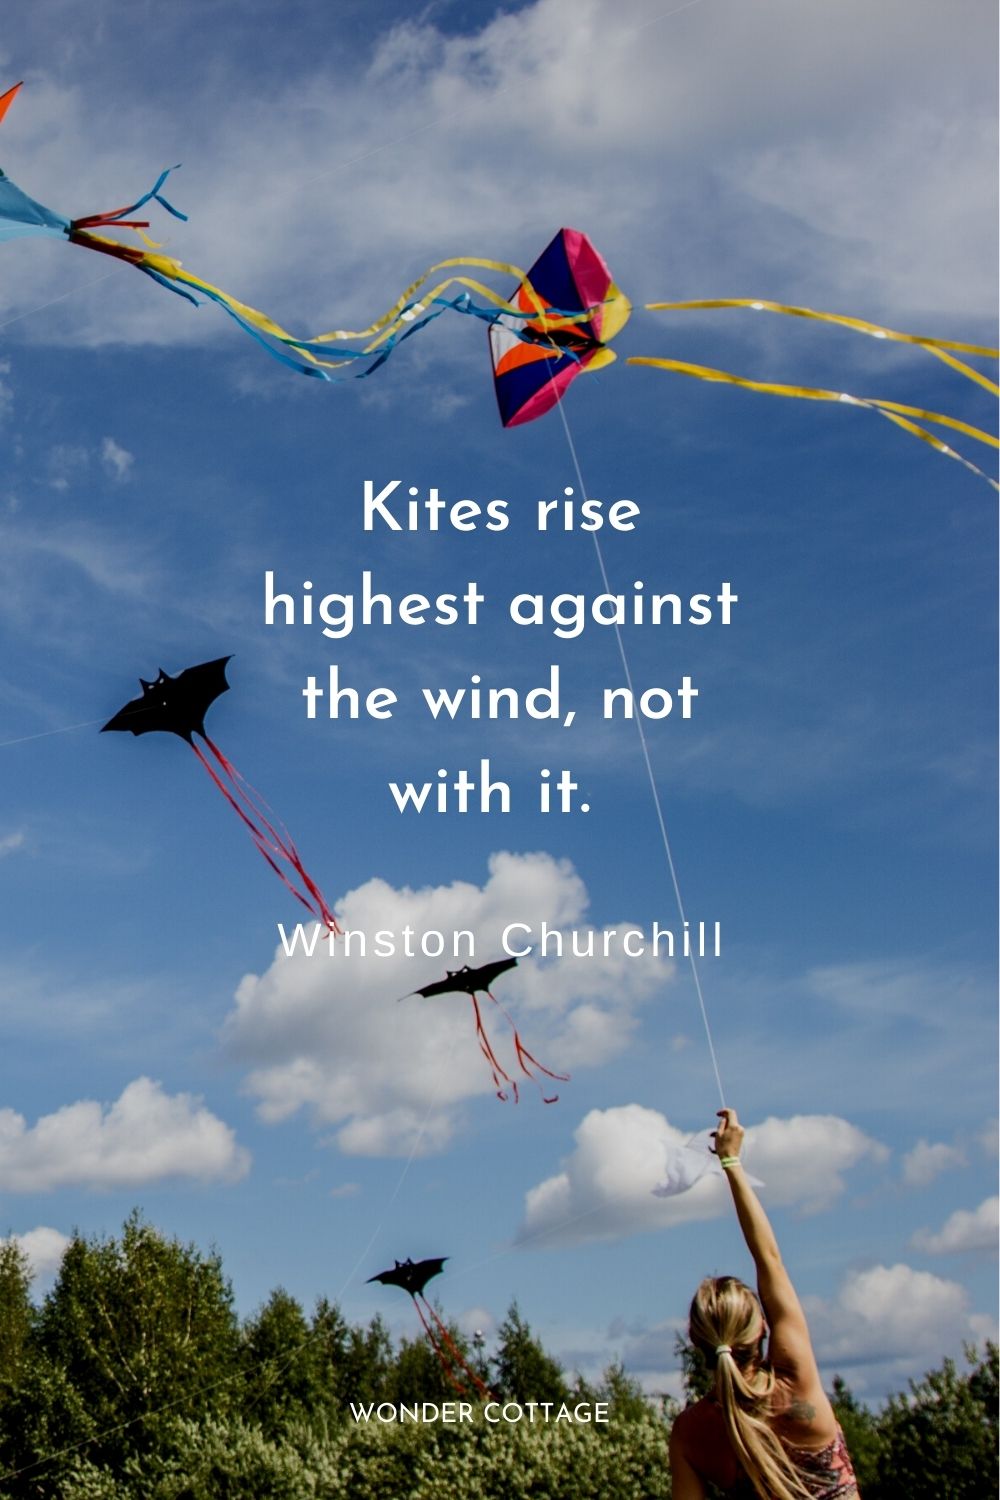 Kites rise highest against the wind, not with it. Winston Churchill